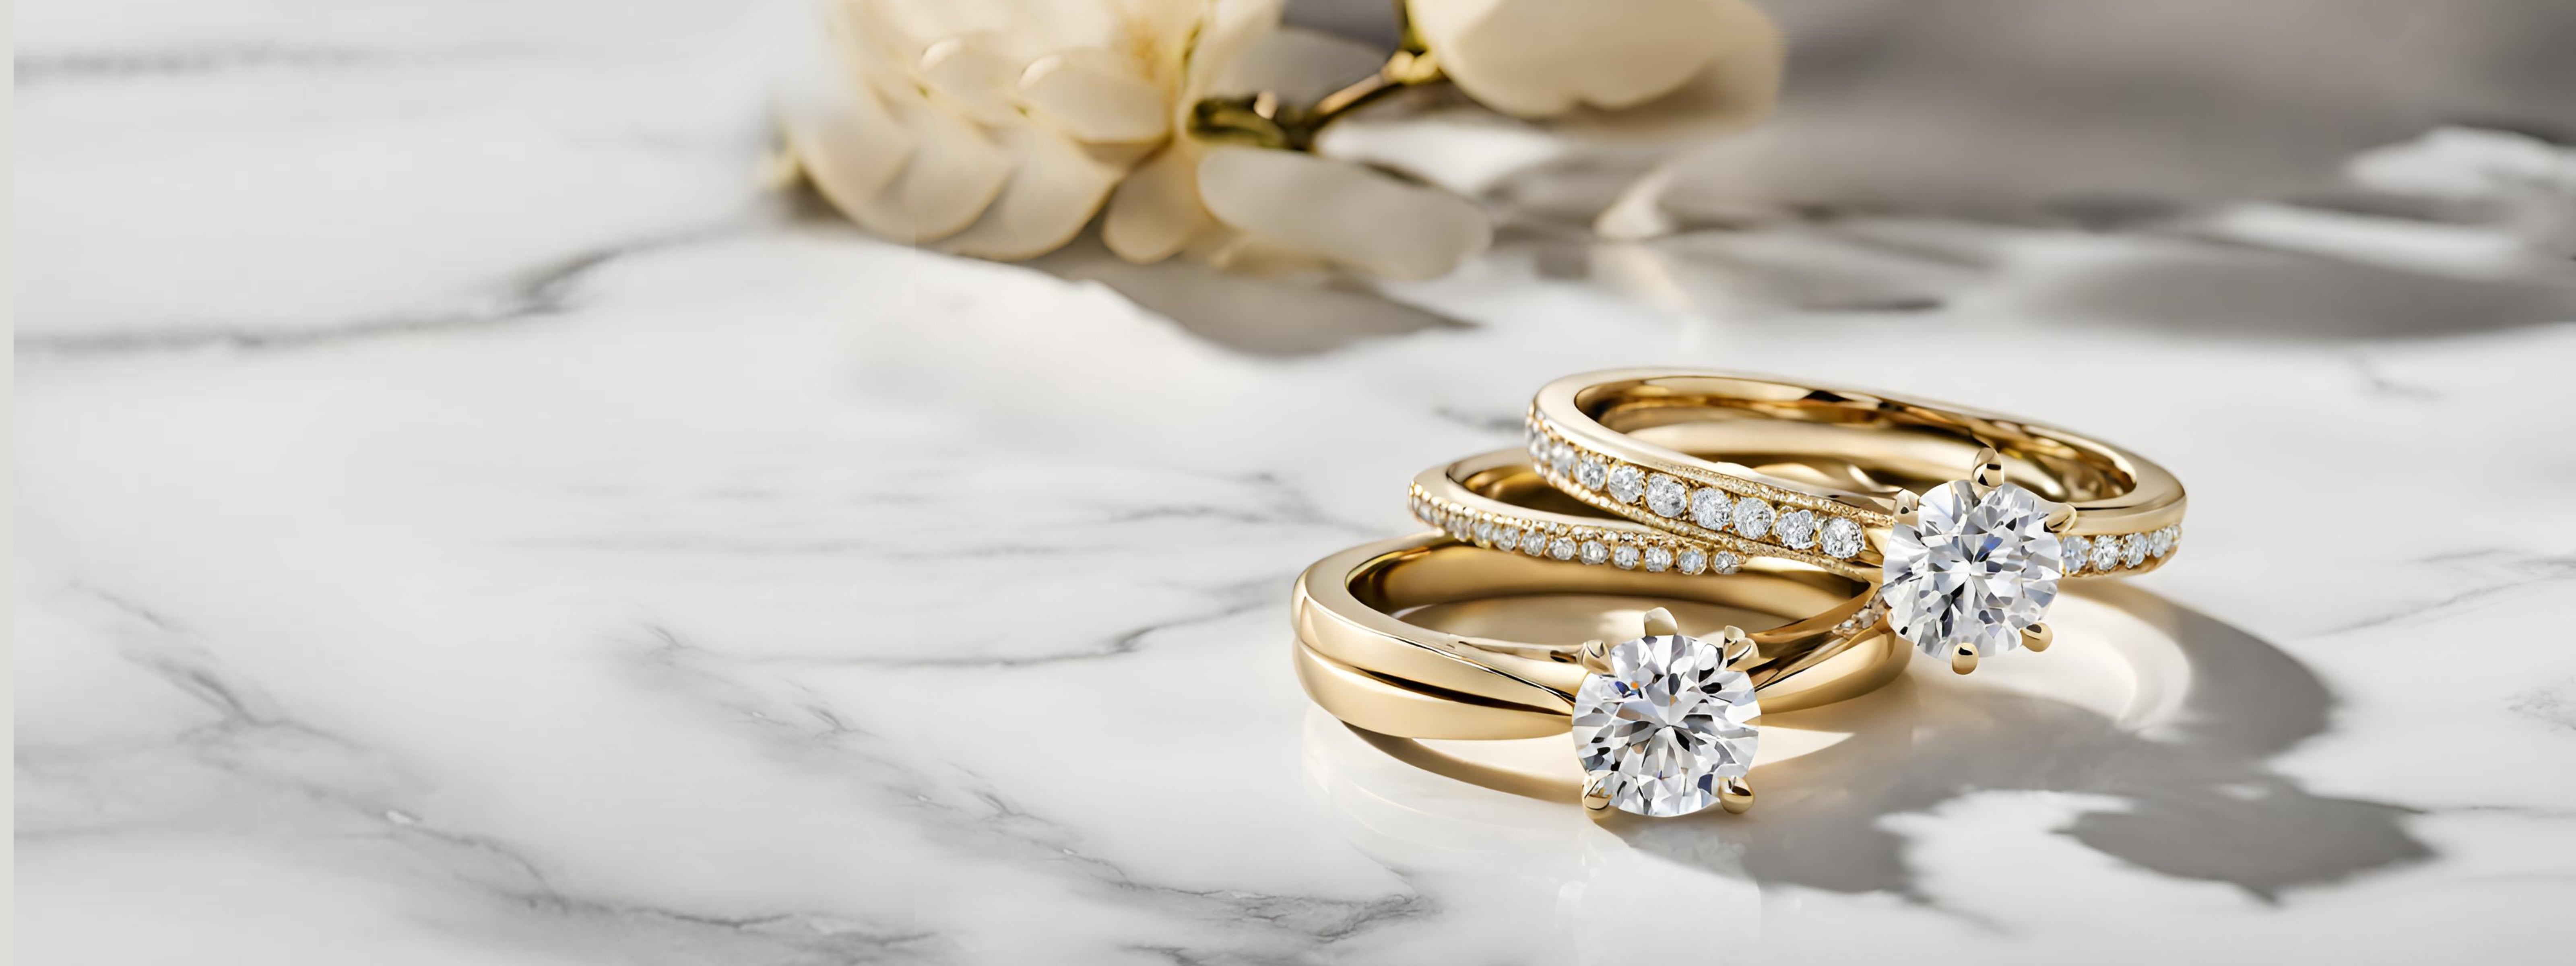 How do you choose the perfect engagement ring? - Laings